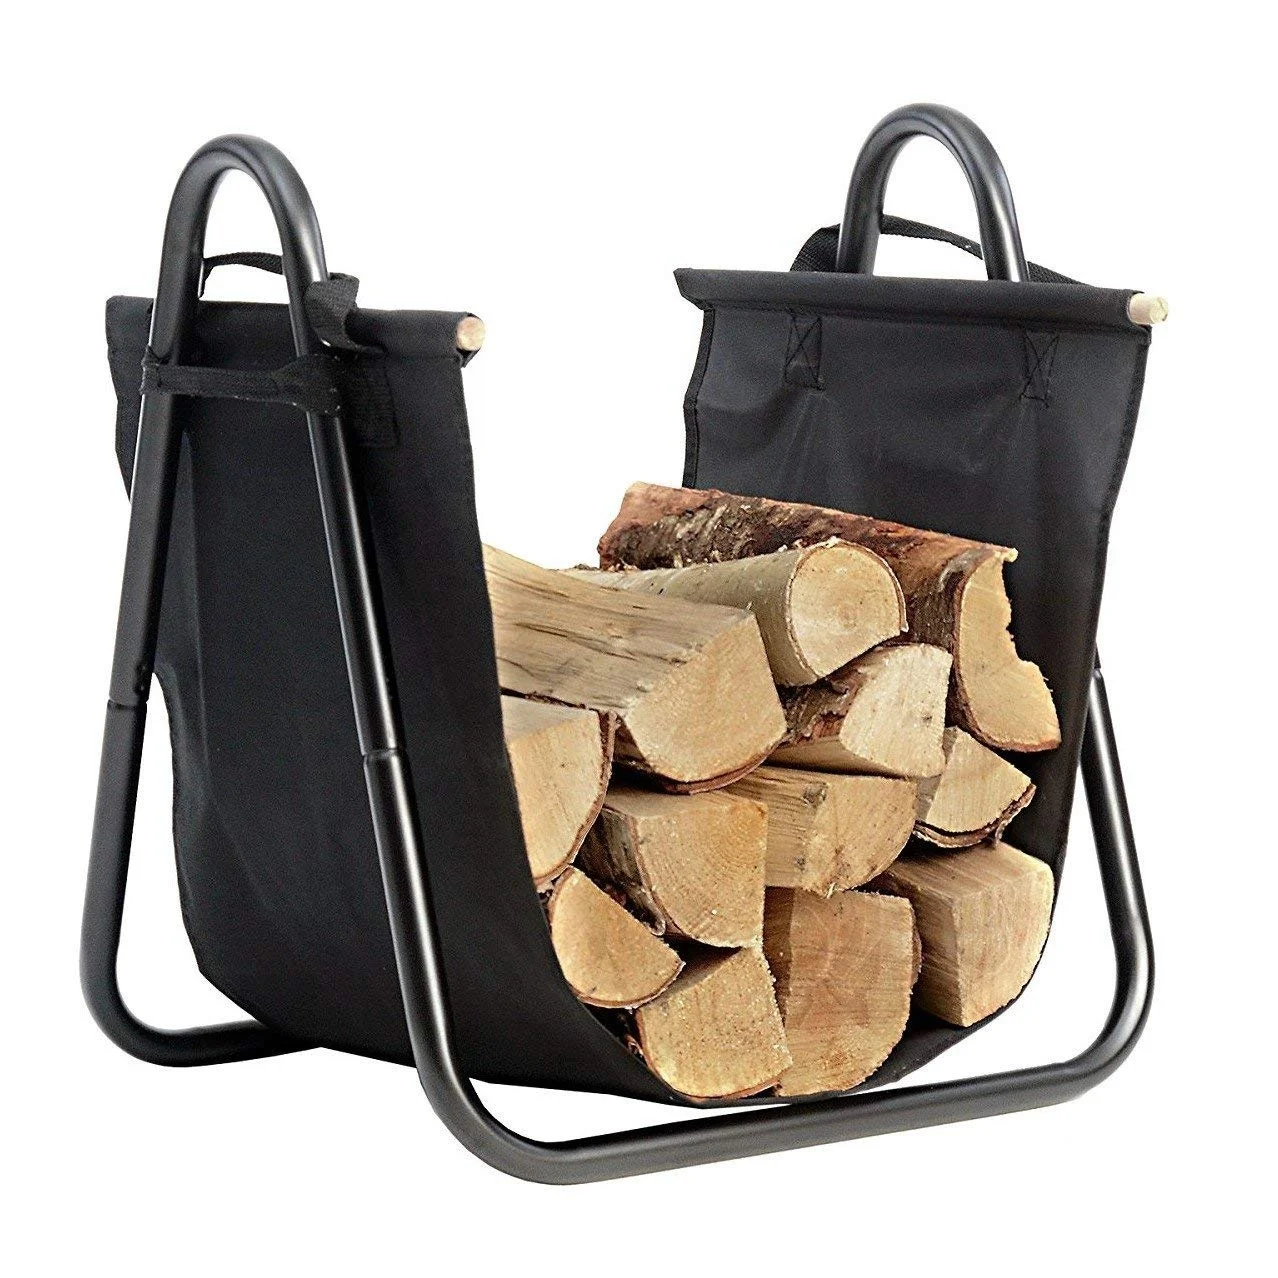 Firewood Log Rack Carrier Canvas Tote Indoor Heavy Duty Storage Fireplace Holder